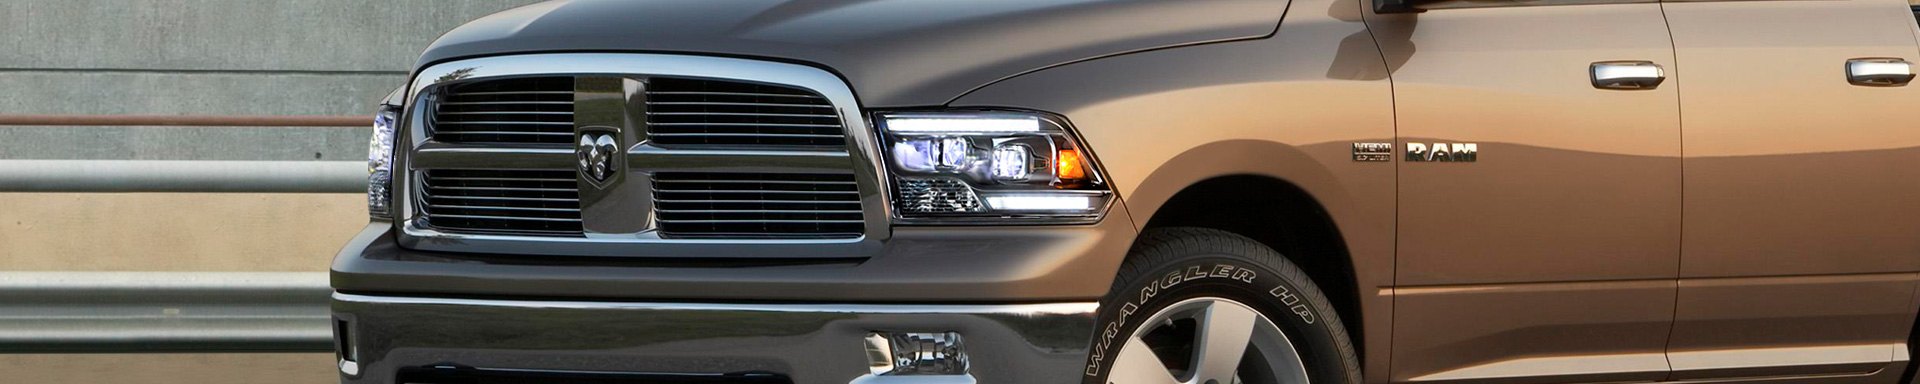 Make Your Ram More Adventure-Ready With New Morimoto XB Lights